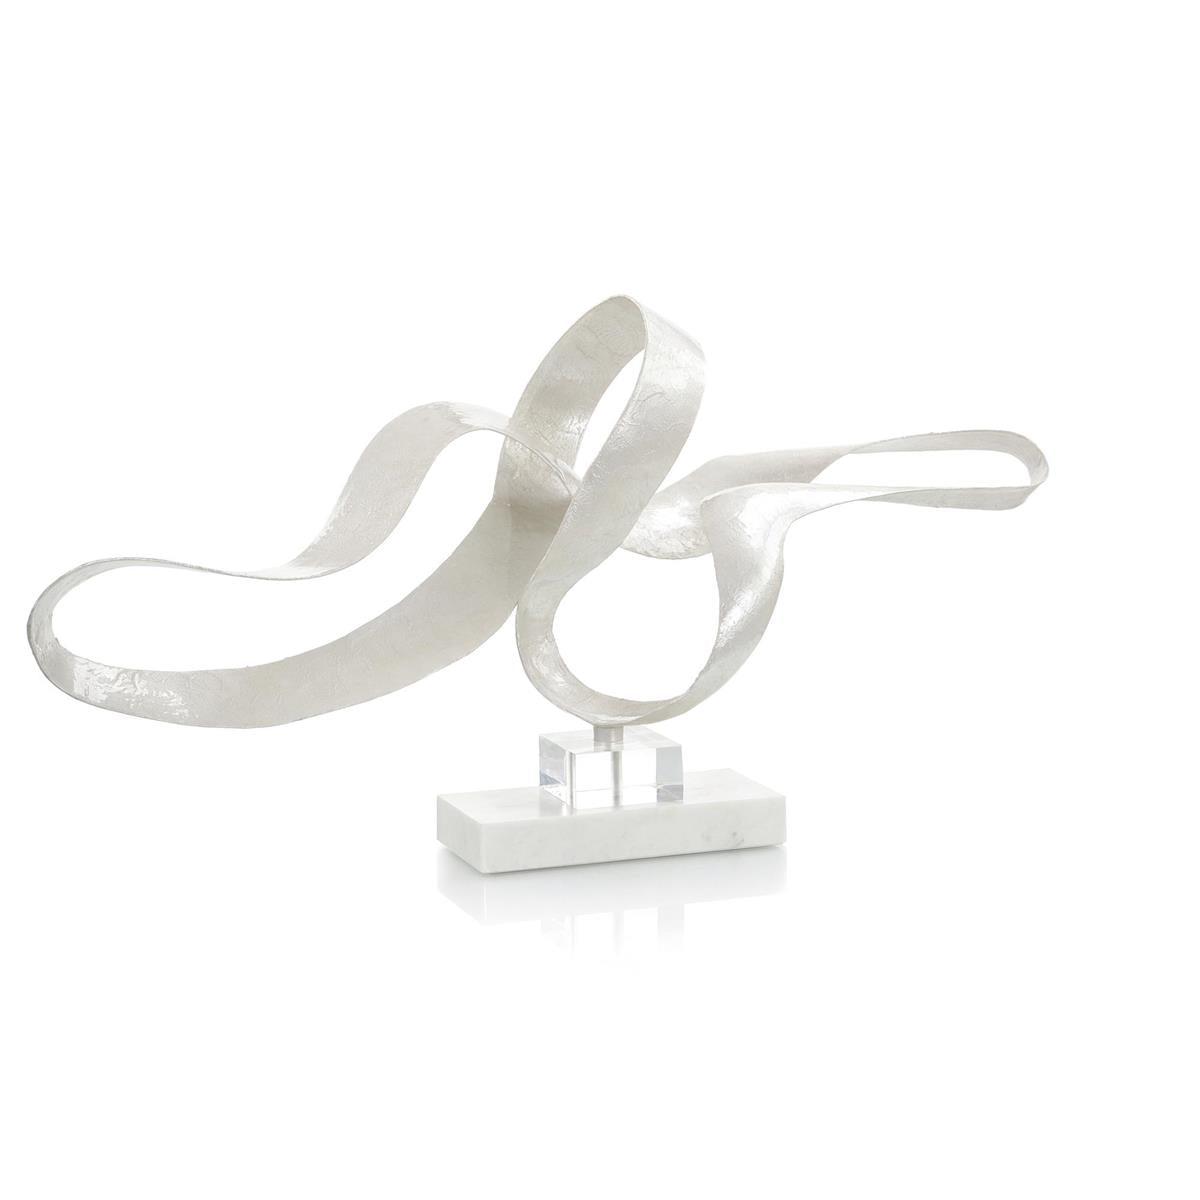 White Pearlized Sculpture-John Richard-Sculptures & Objects-Artistic Elements